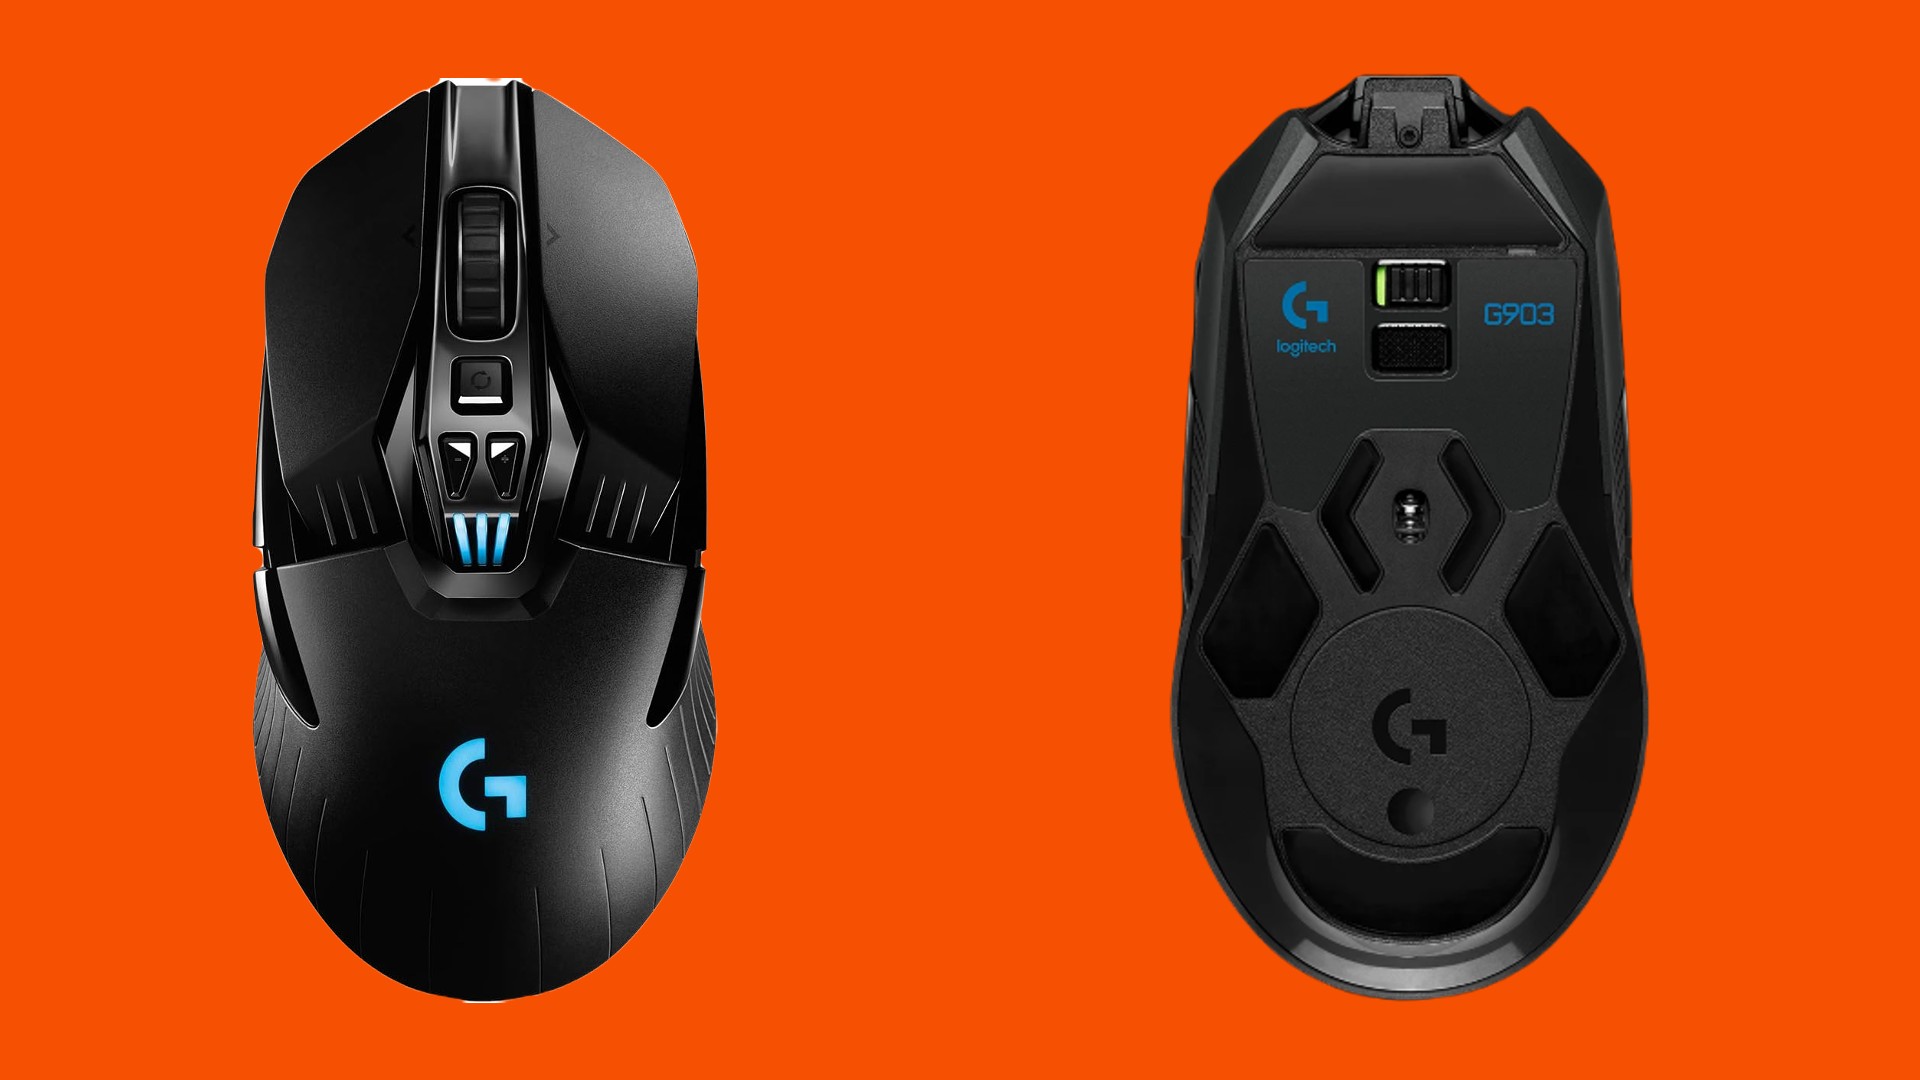 This Logitech mouse is unashamedly heavy, and it is 40% off right now